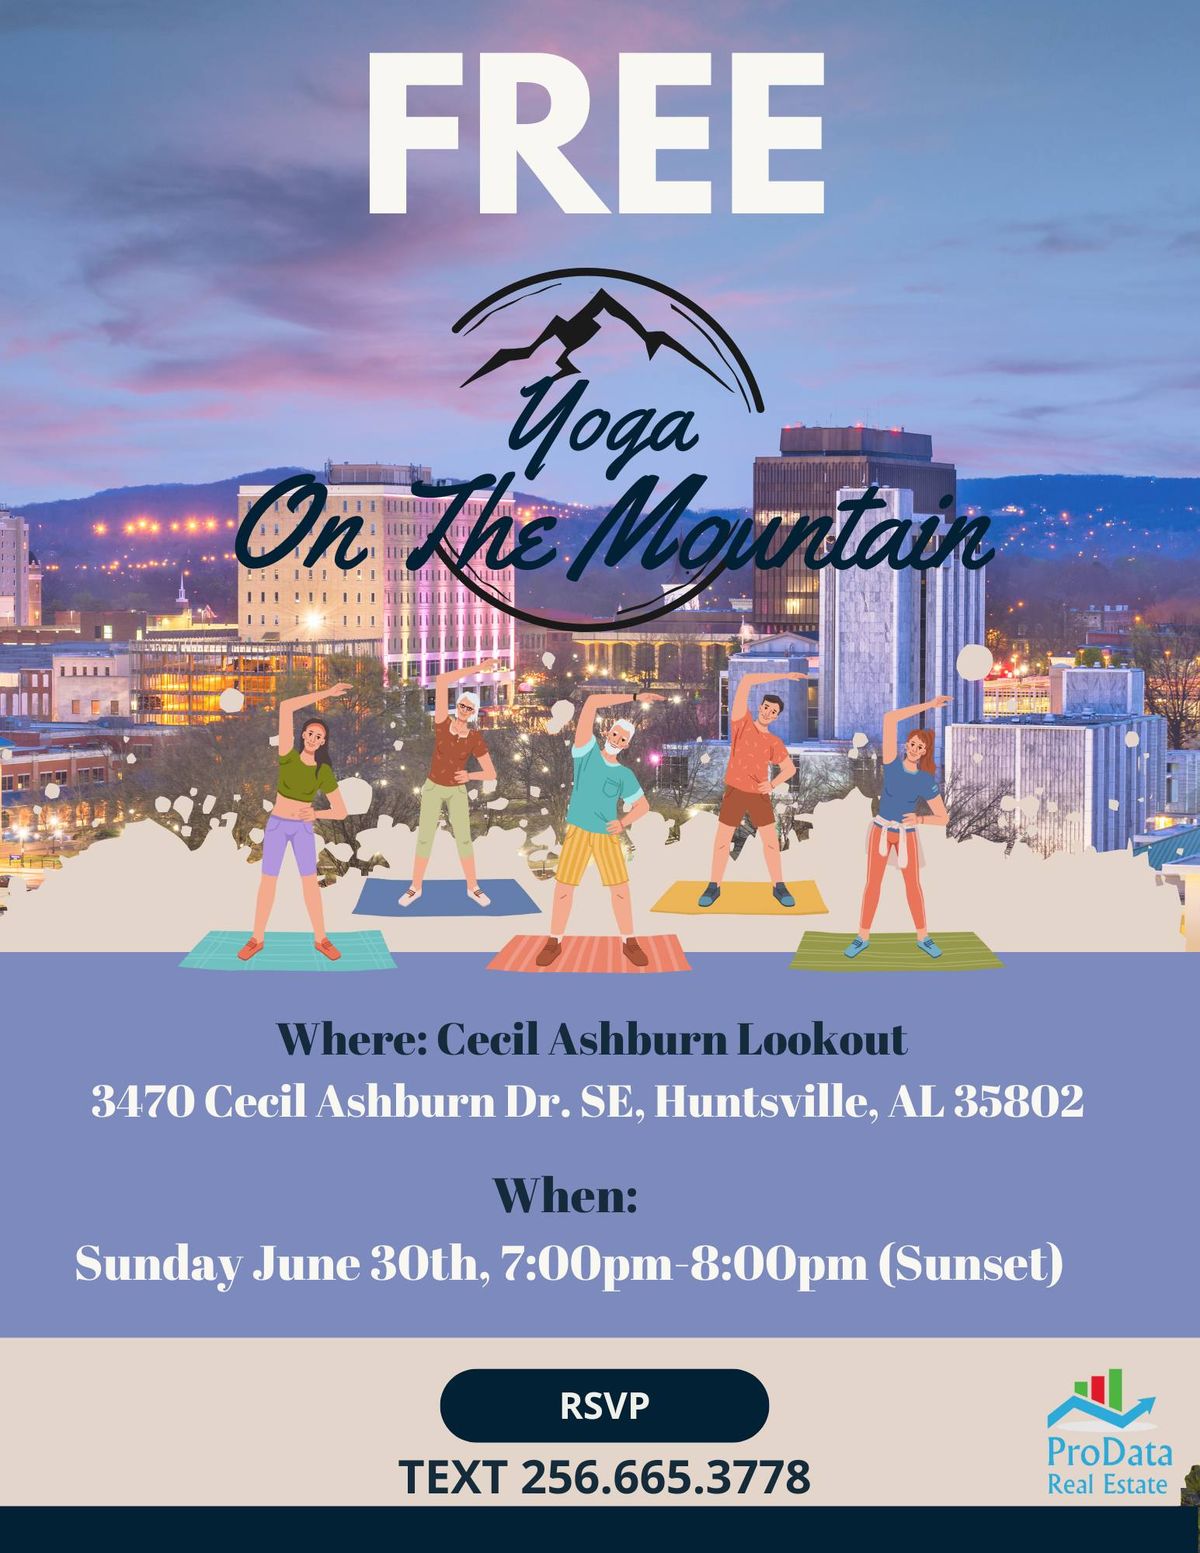 FREE yoga @ Cecil Ashburn Lookout